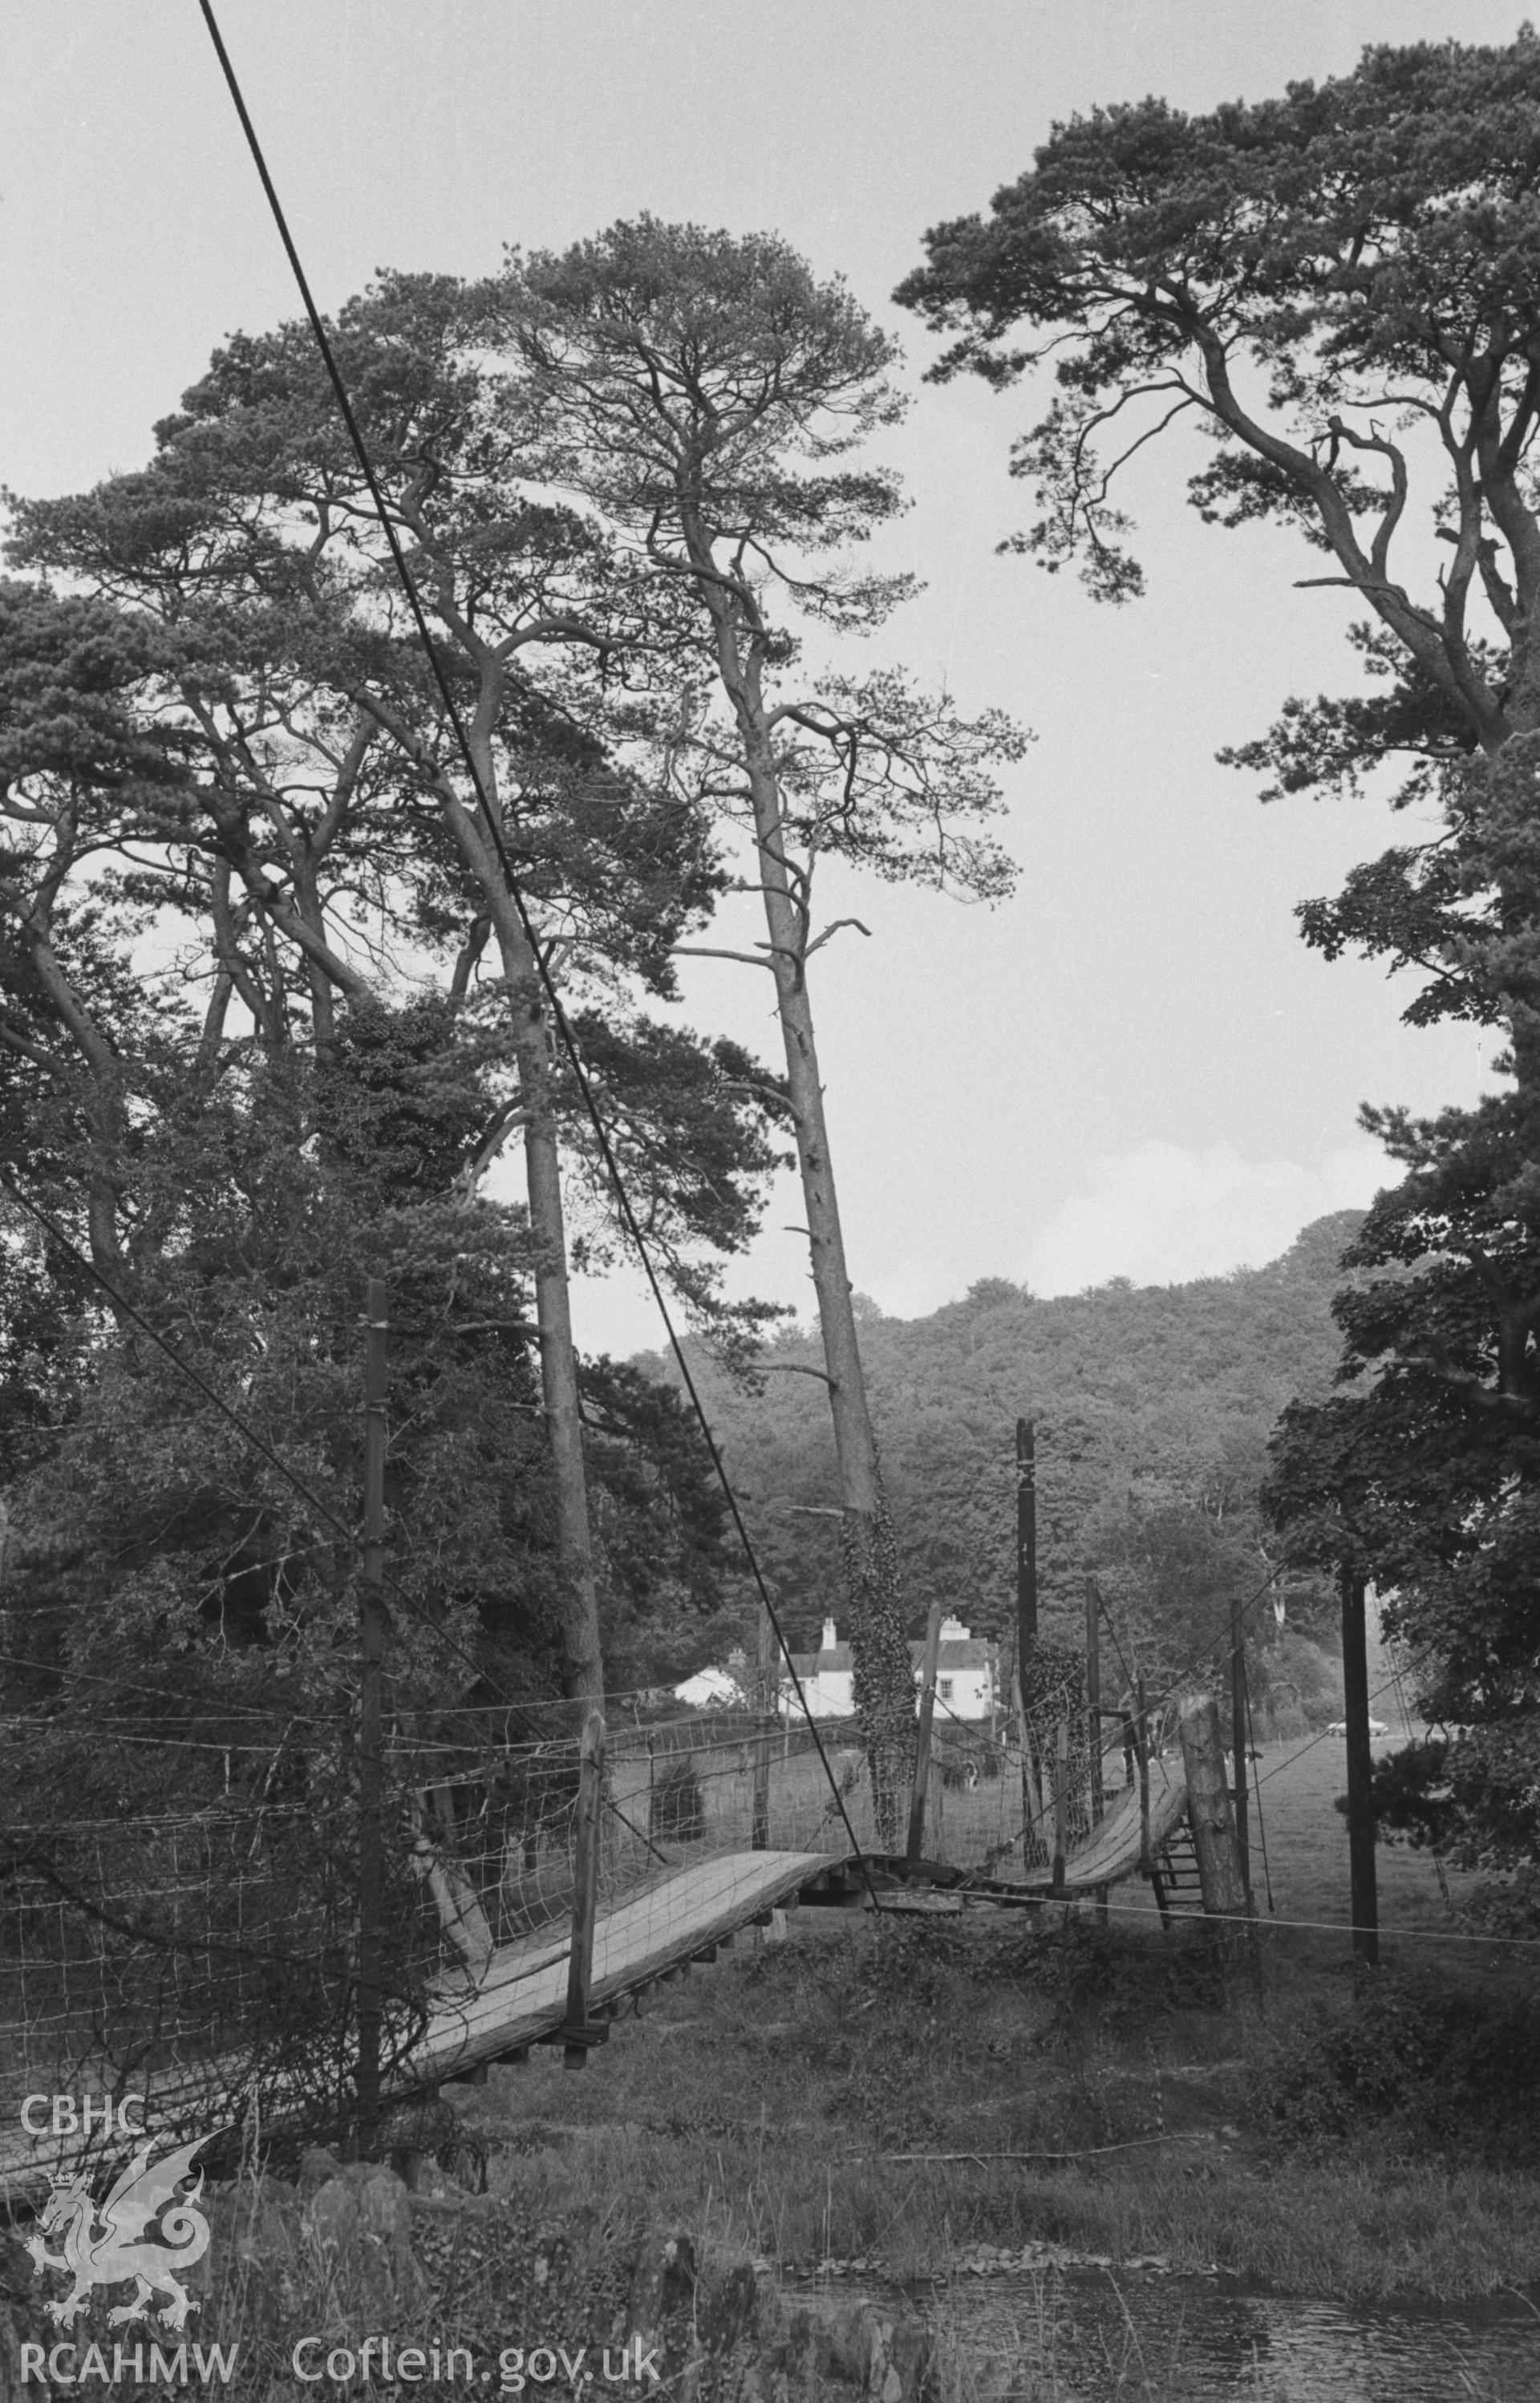 Digital copy of a black and white negative showing the suspension footbridge across the Teifi at Llandysul with Dol-Llan beyond. Photographed by Arthur O. Chater in August 1965 from Grid Reference SN 4190 4074, looking east north east.